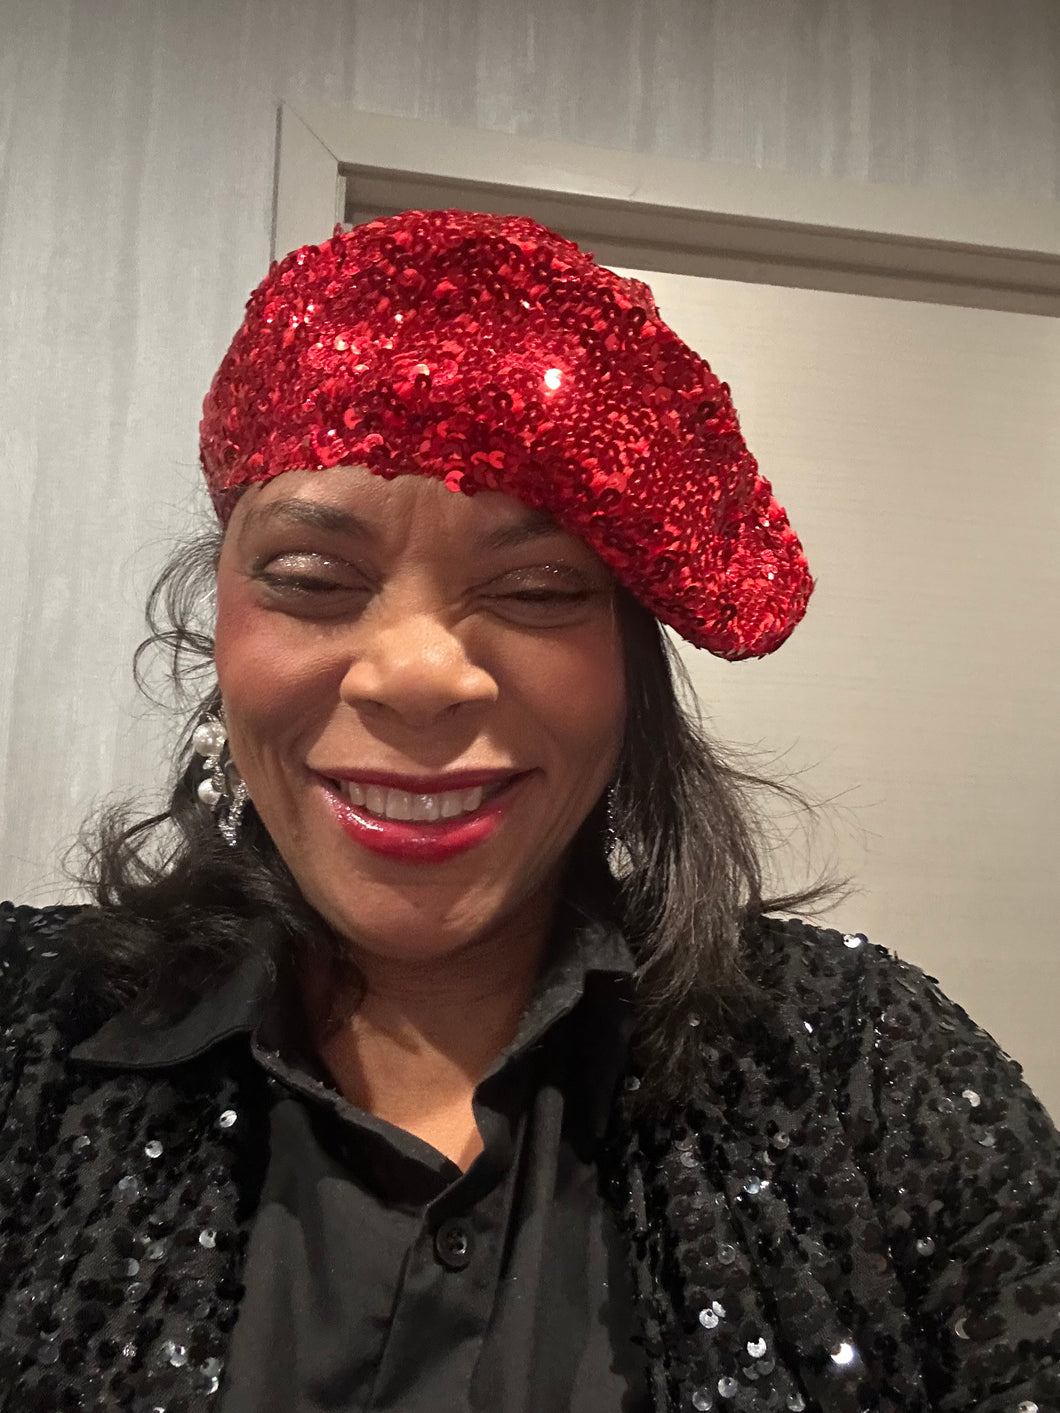 Ms. Loved Red Sequin Beret